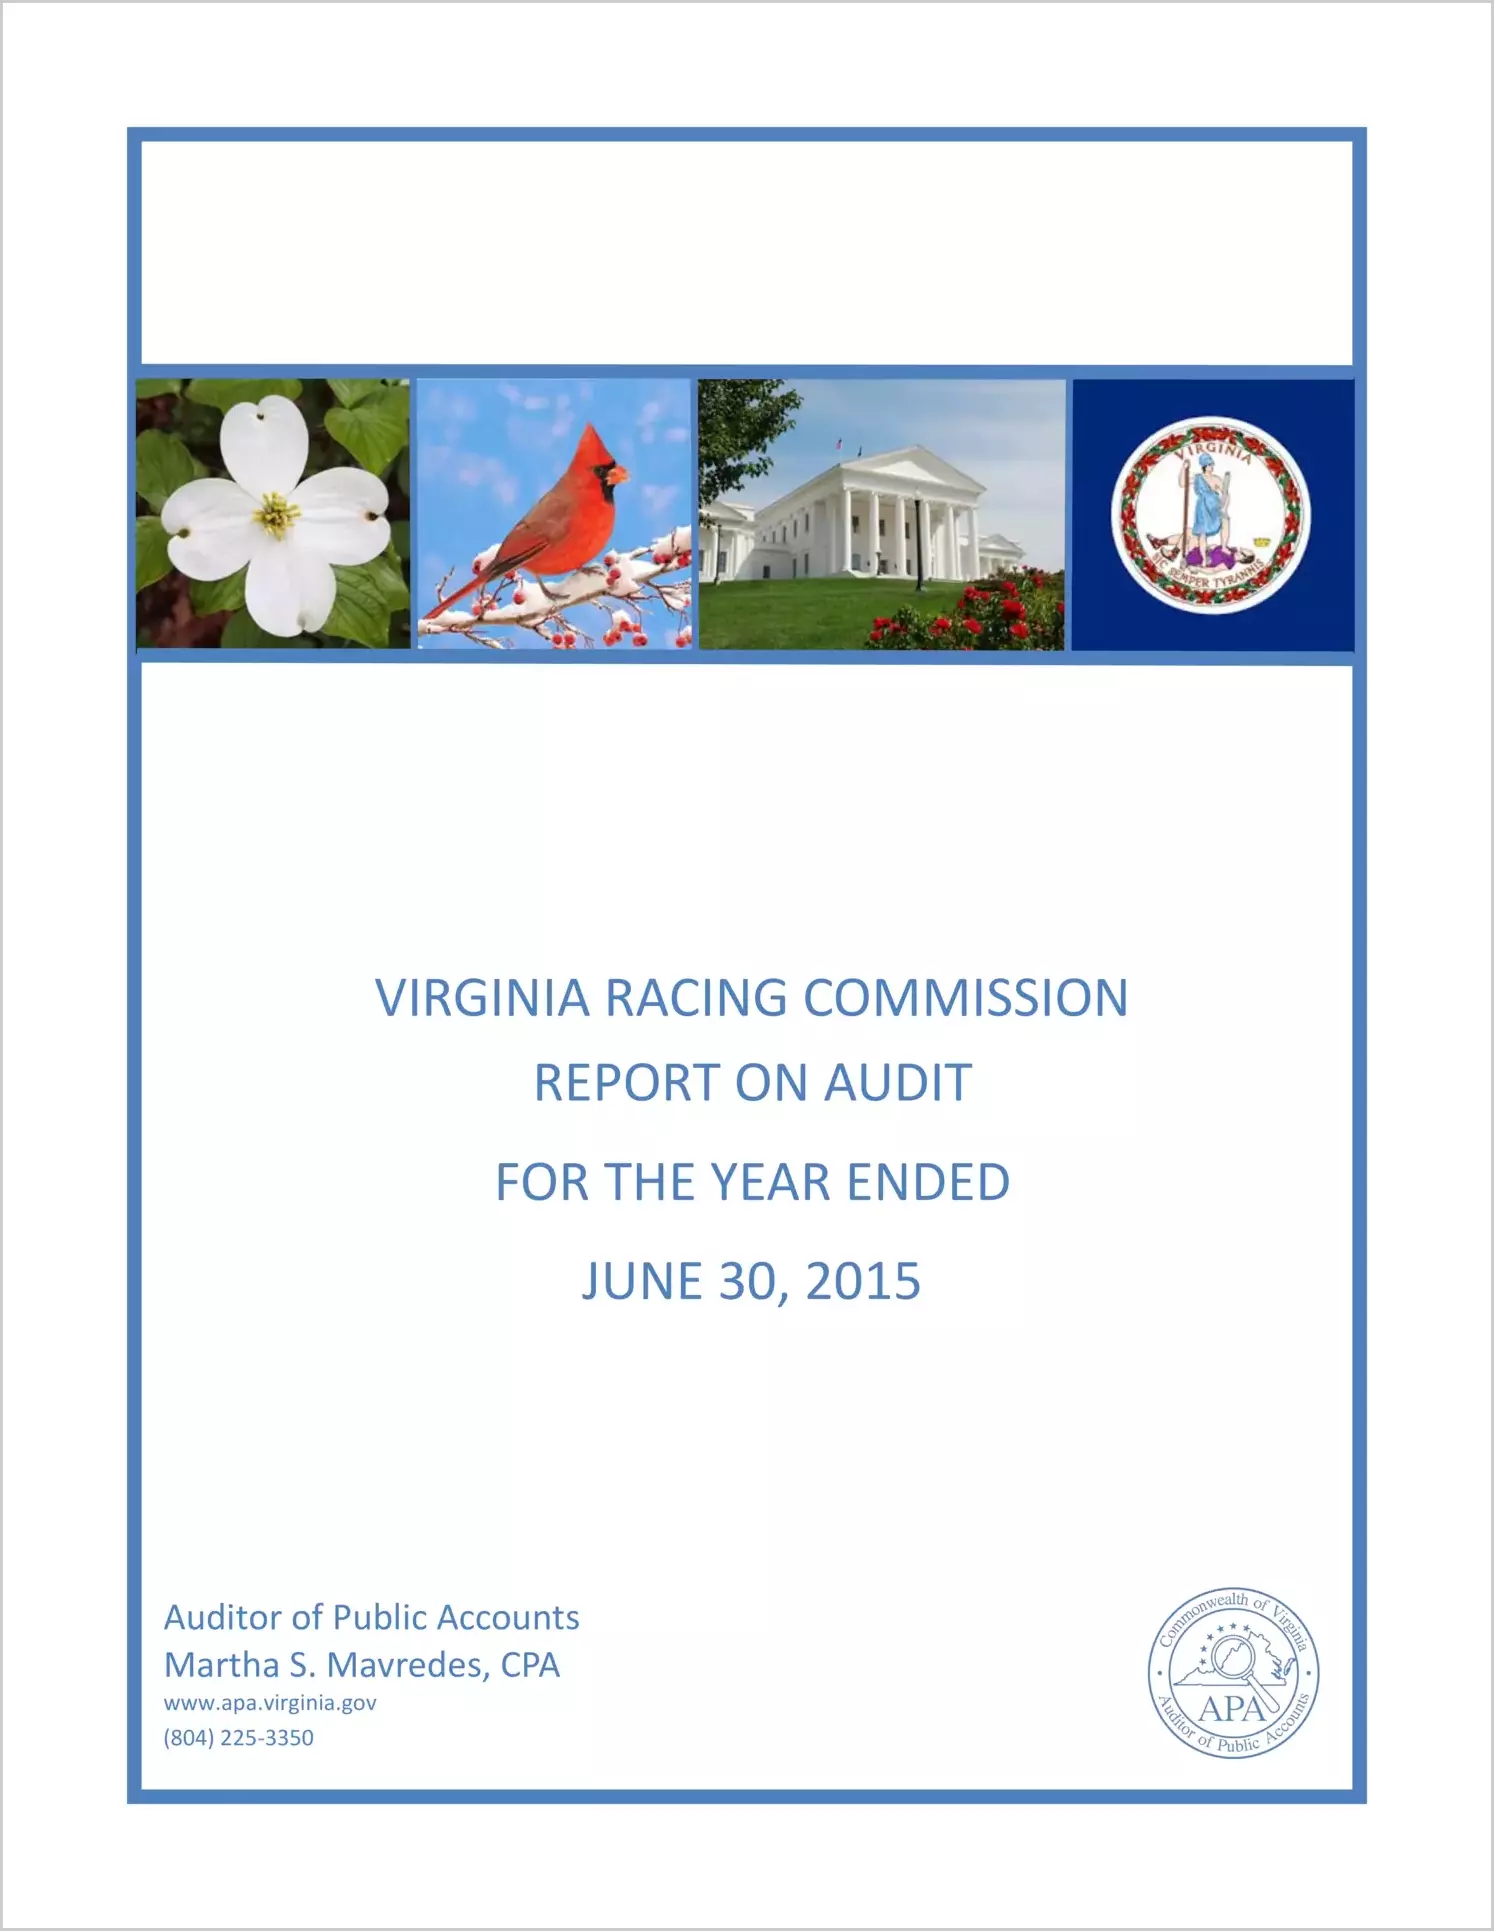 Virginia Racing Commission for the year ended June 30, 2015